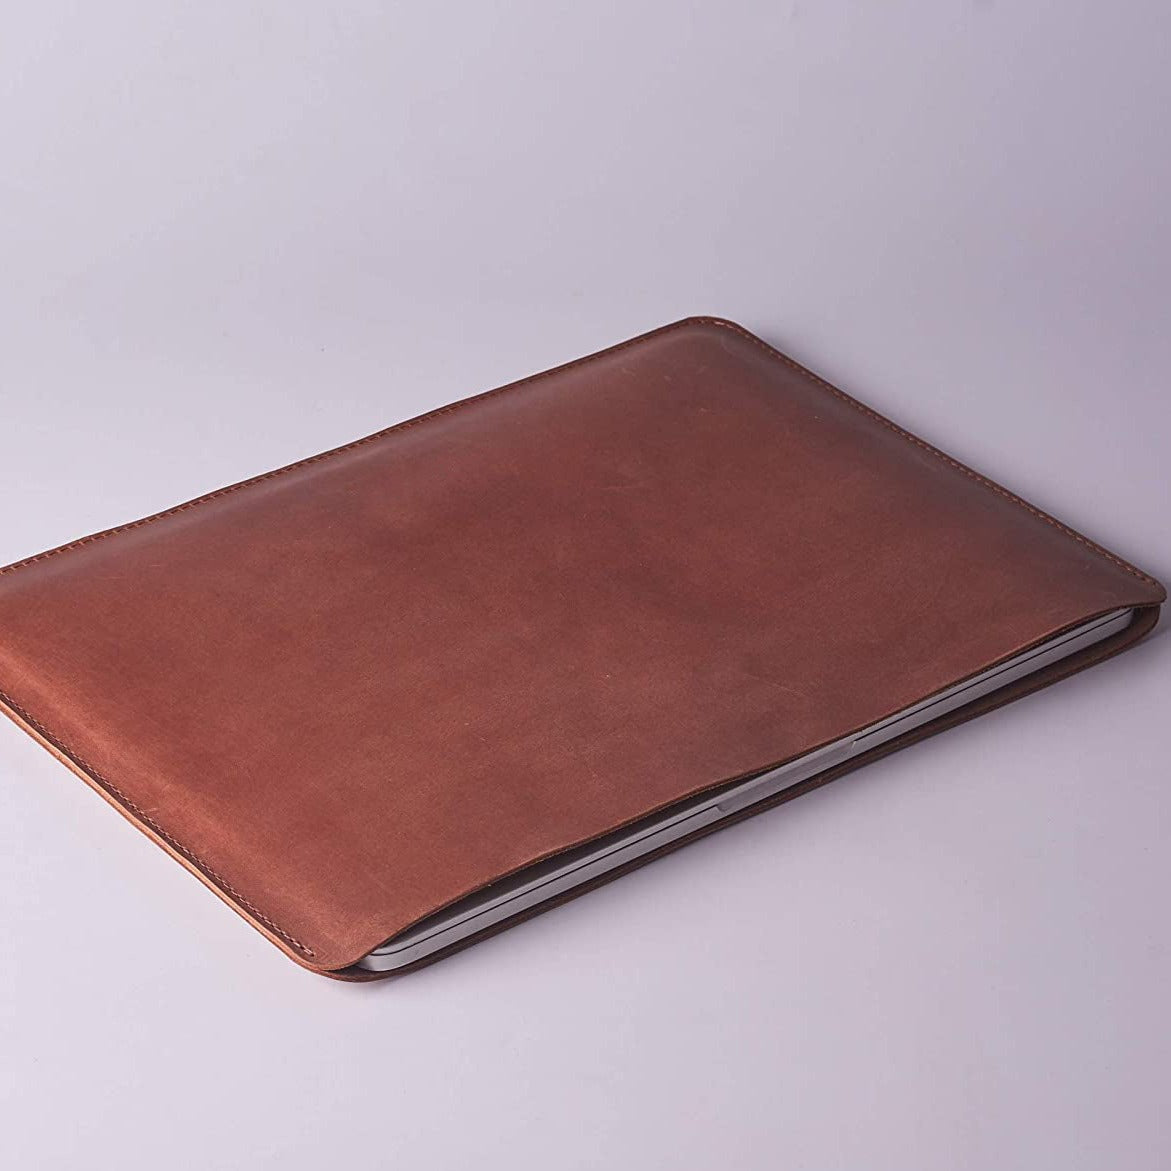 Macbook Sleeve 13″ (For Bare Macbooks/No Shell) – Astrid Leather